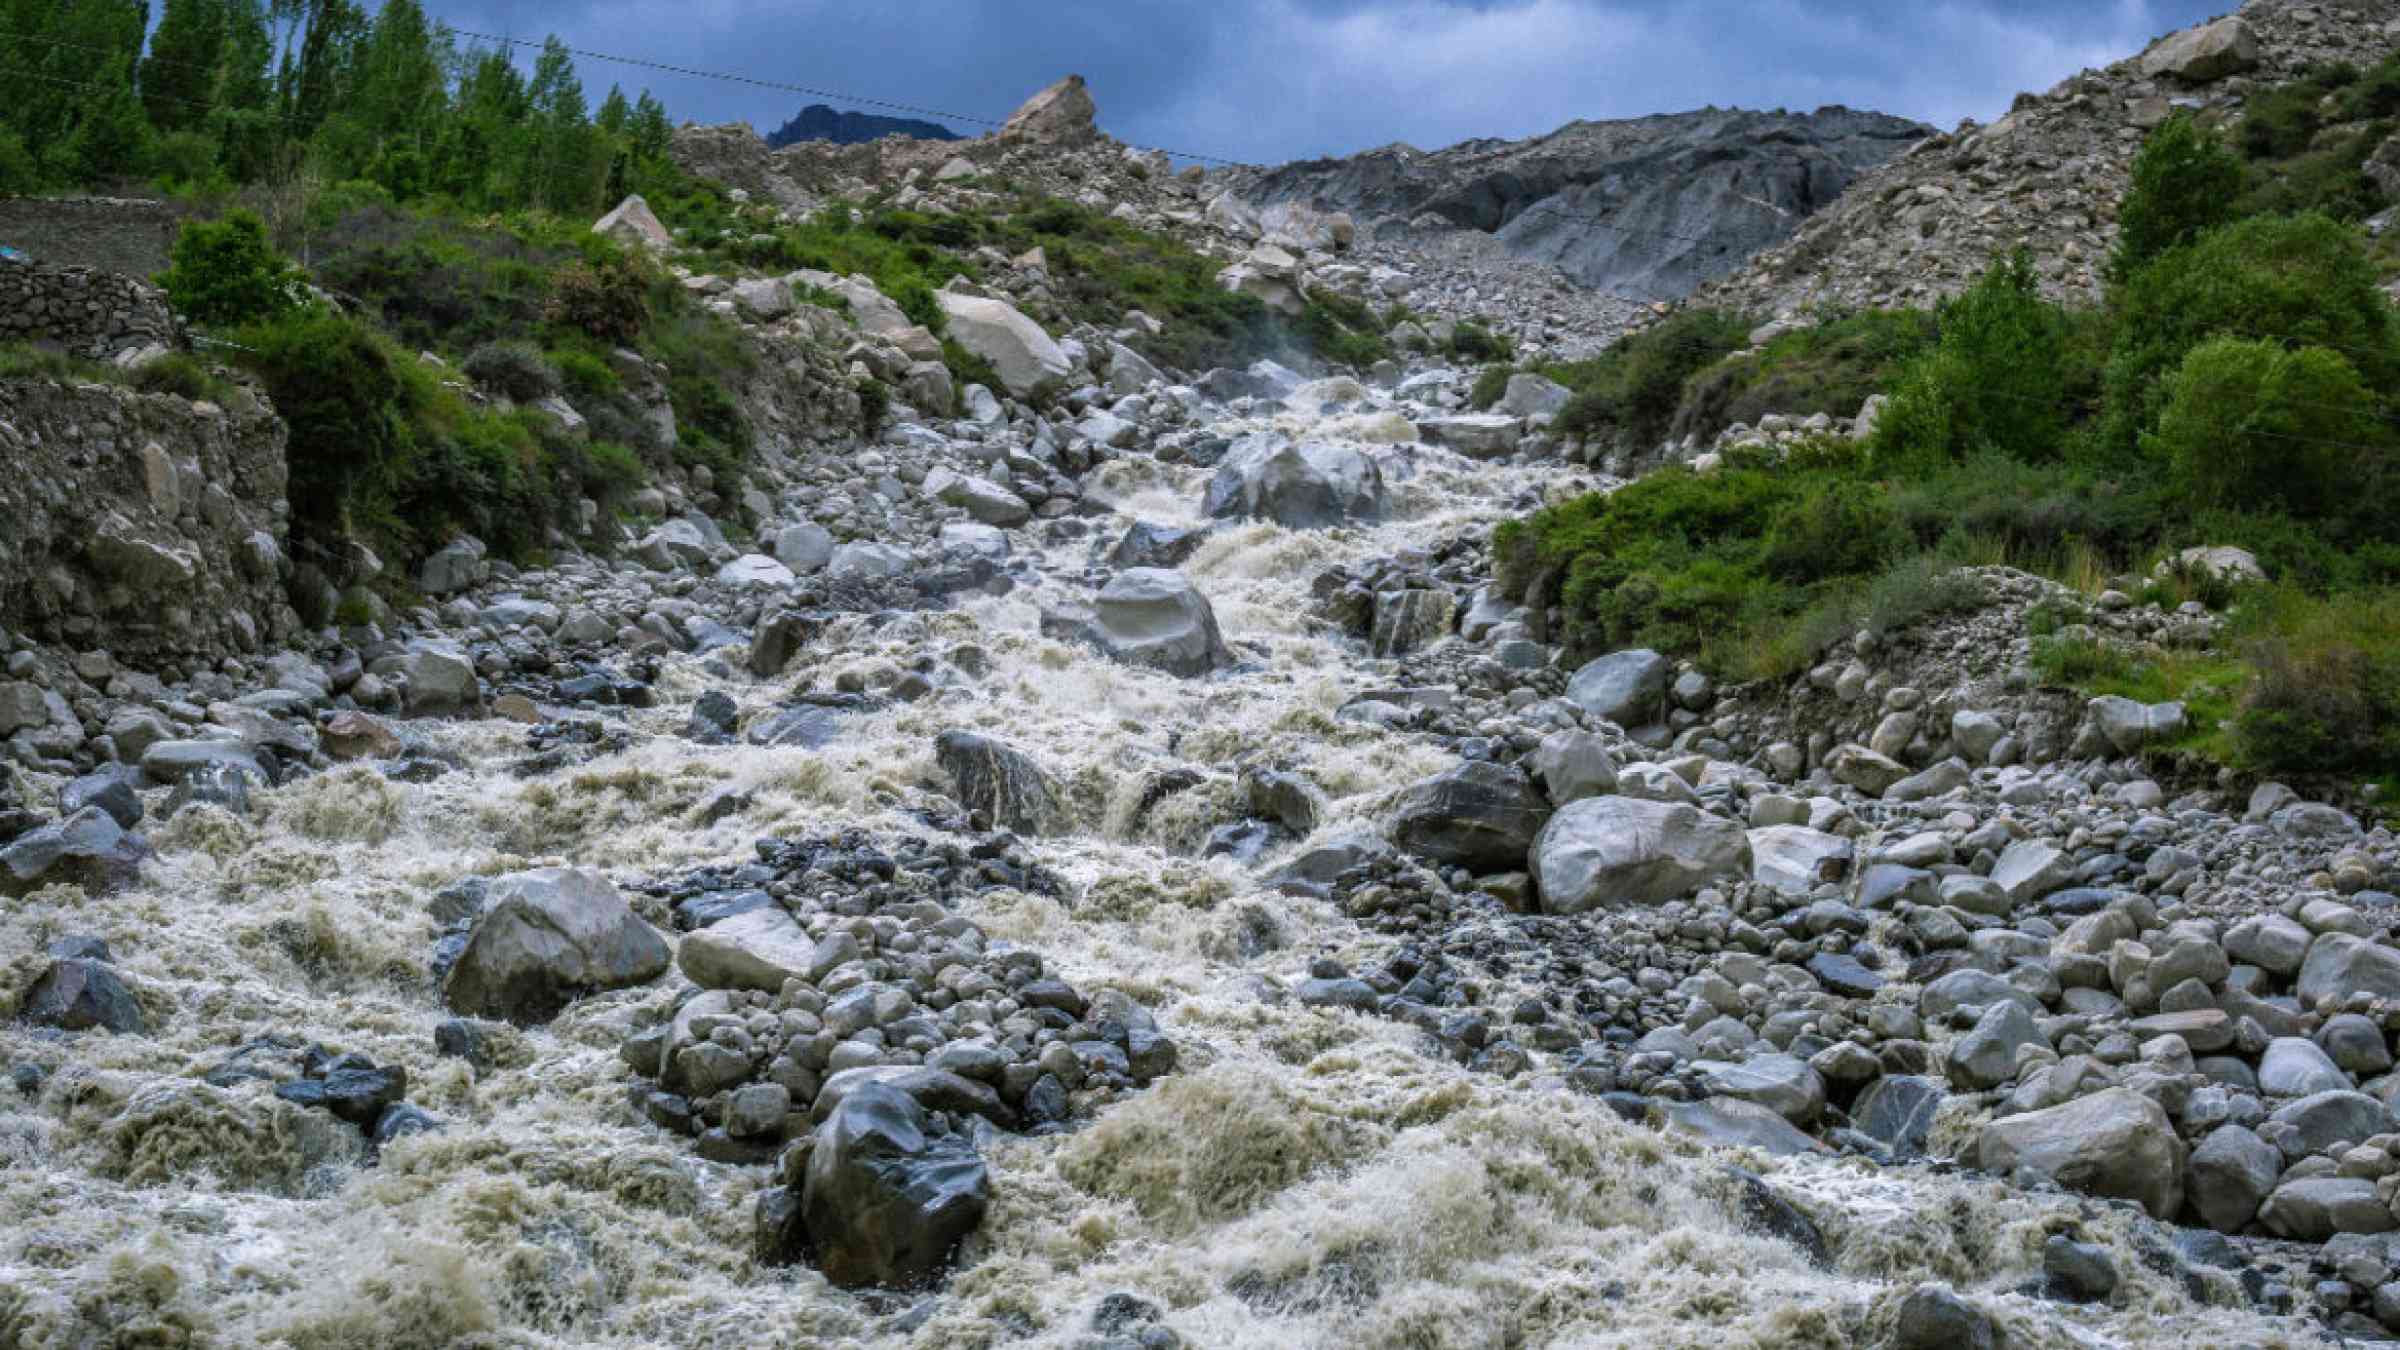 Flood in a mountain produced by a glacial lake outburst